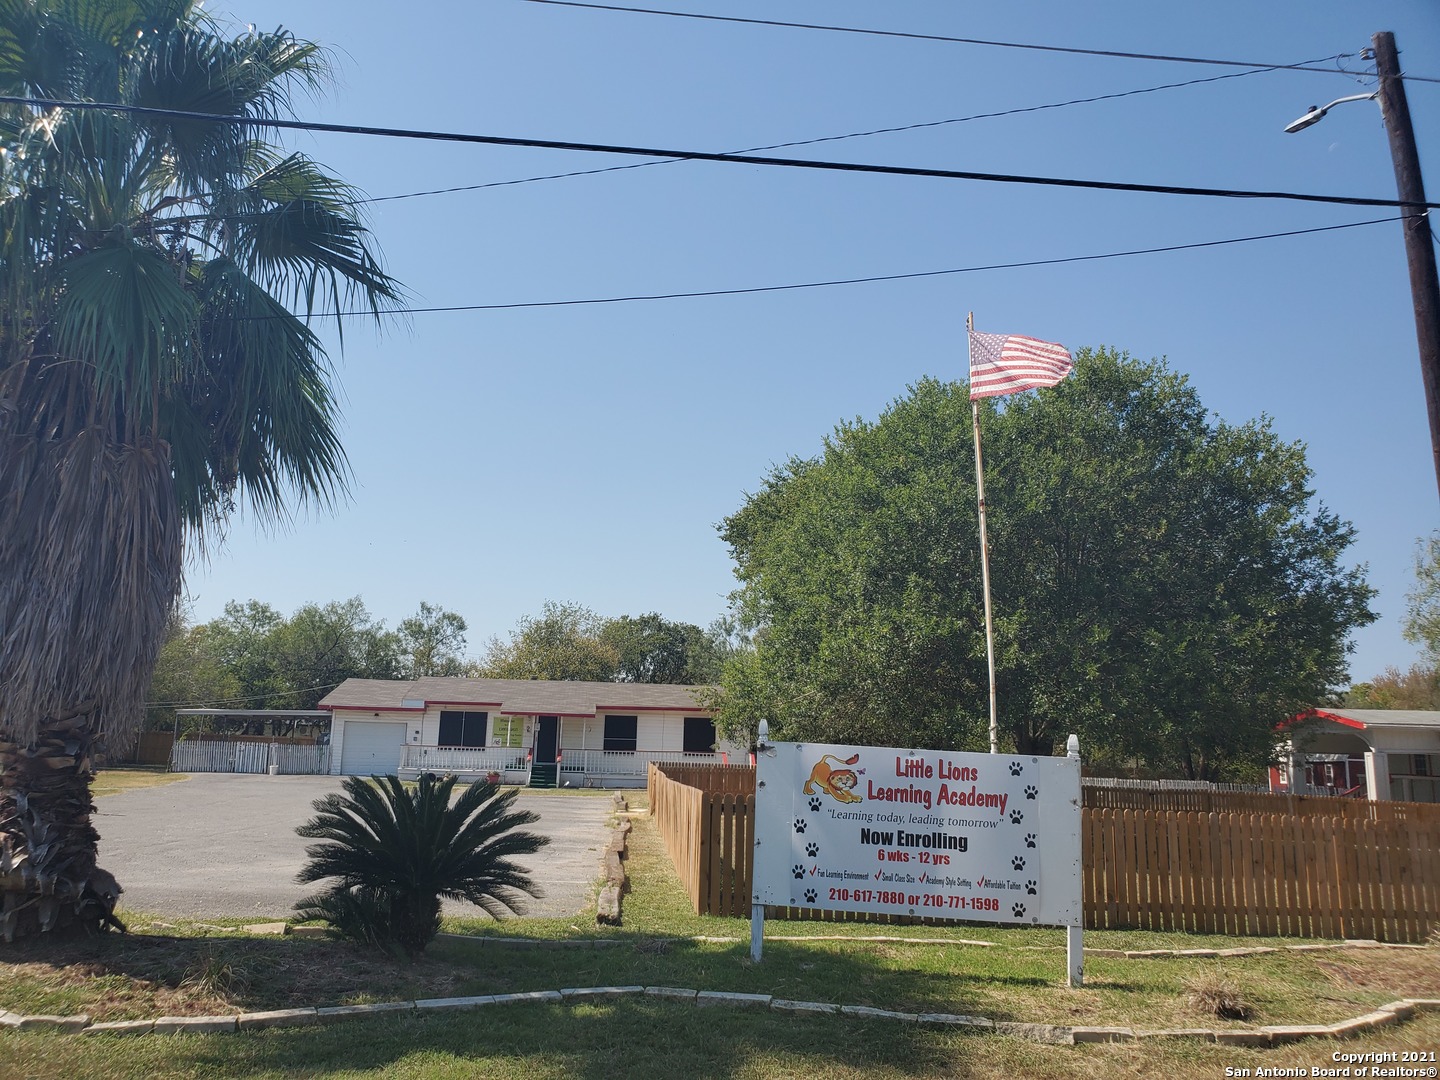 The property includes an ongoing concern Daycare Business with a capacity of 168 children. The sale includes 3 buildings, a playground, and plenty of Student activities.  Located in the growing Talley Rd., Protranco, and Wiseman area, the daycare is centered in a growing demographic area.  Located 3 minutes or 1.2 miles from Bennie Cole Elementry School, 7 minutes or 3.6 miles from William J. Brennan H.S., 6 mins or 2.8miles to Clarence Galm Elementry School, this center is in an optimal location to serve the community.